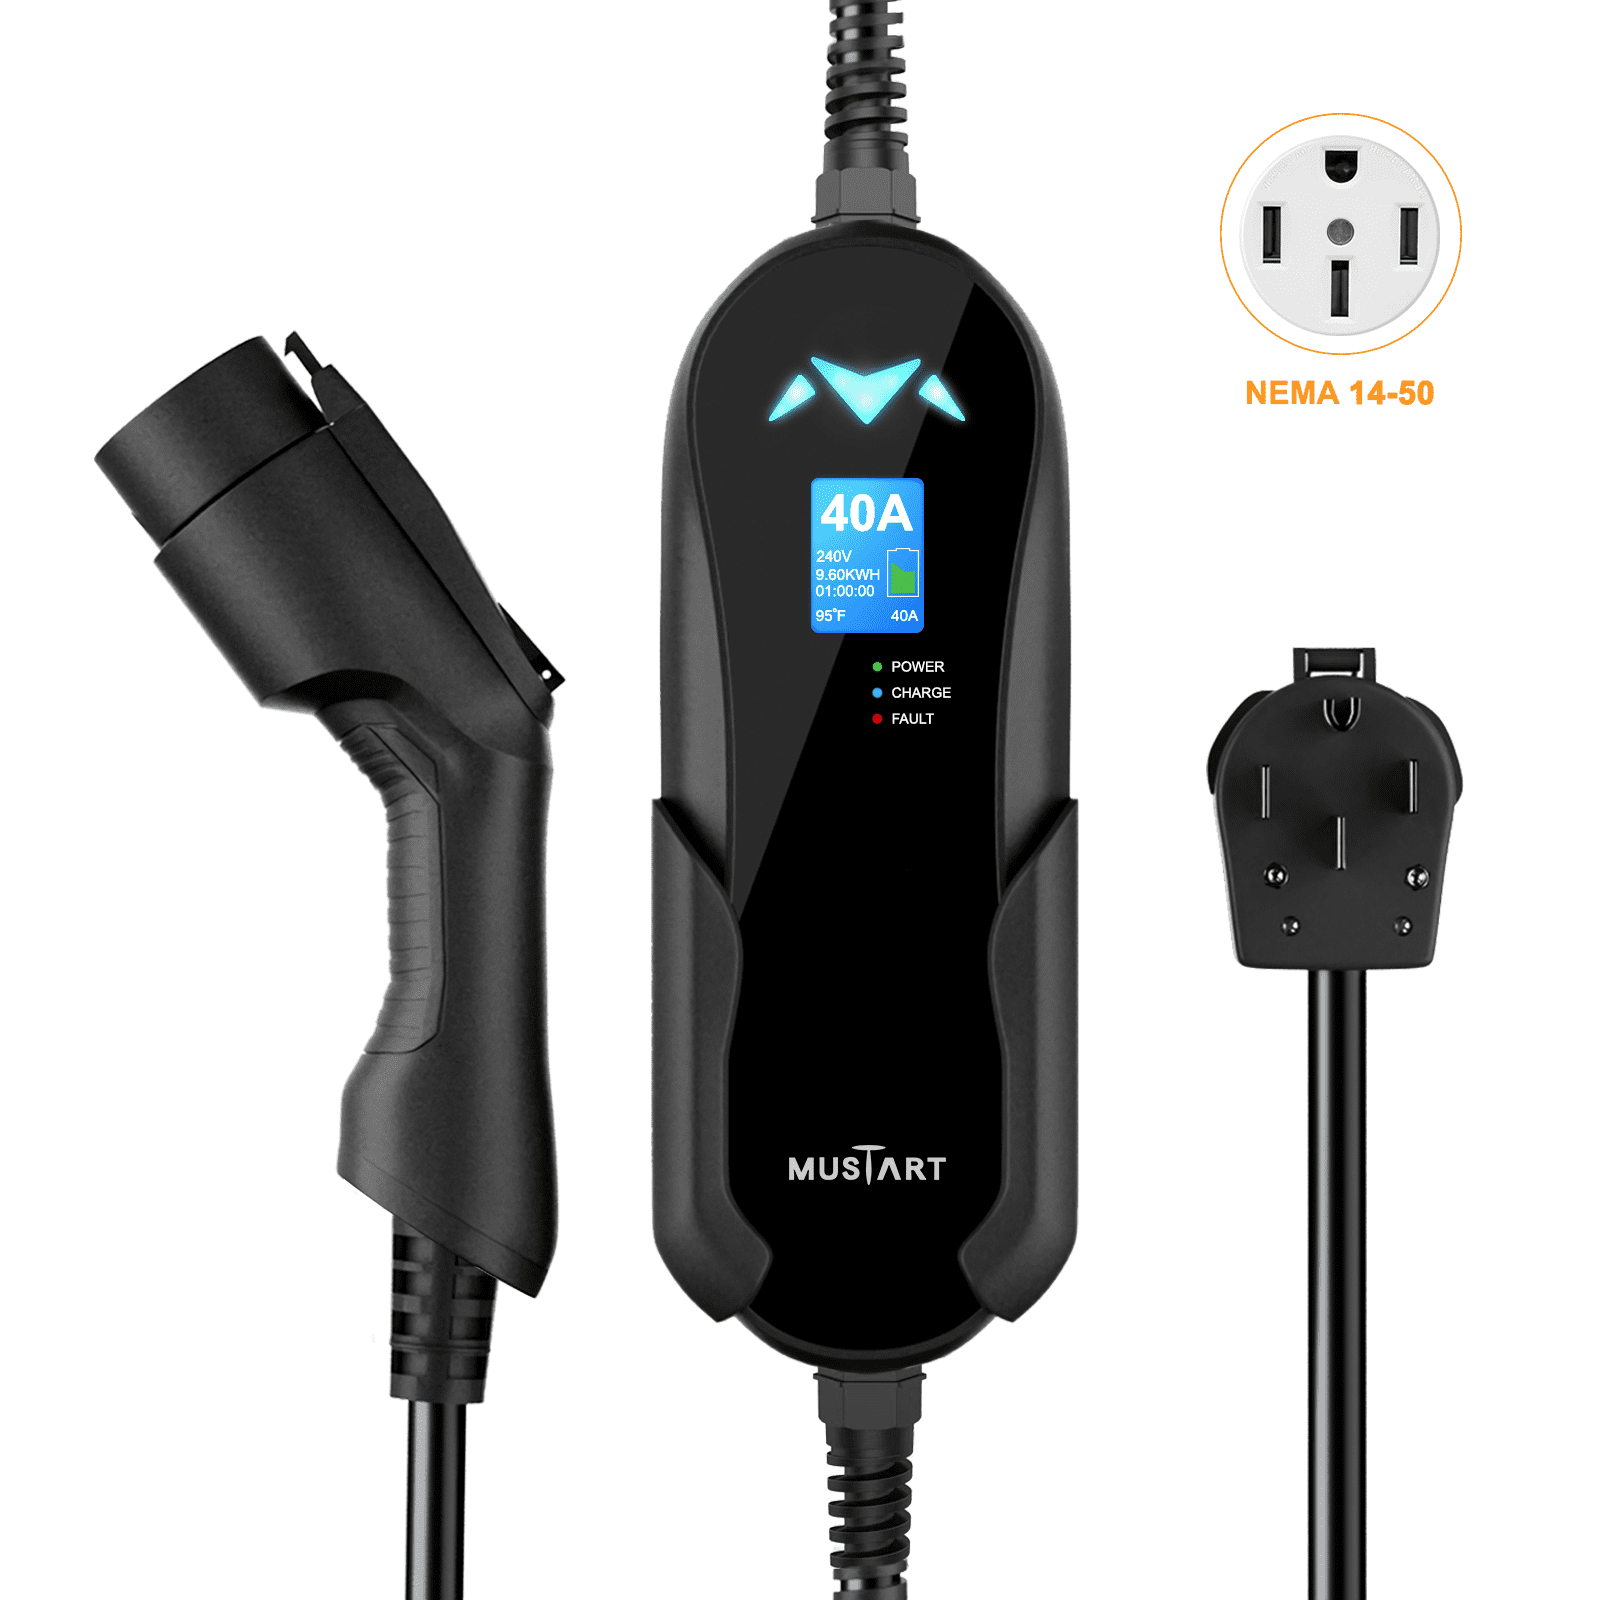  BougeRV Level 2 EV Charger Cable (32A, 25FT) Portable EVSE  Electric Vehicle Charging Station (NEMA14-50) Waterproof Indoor/Outdoor Use  : Automotive